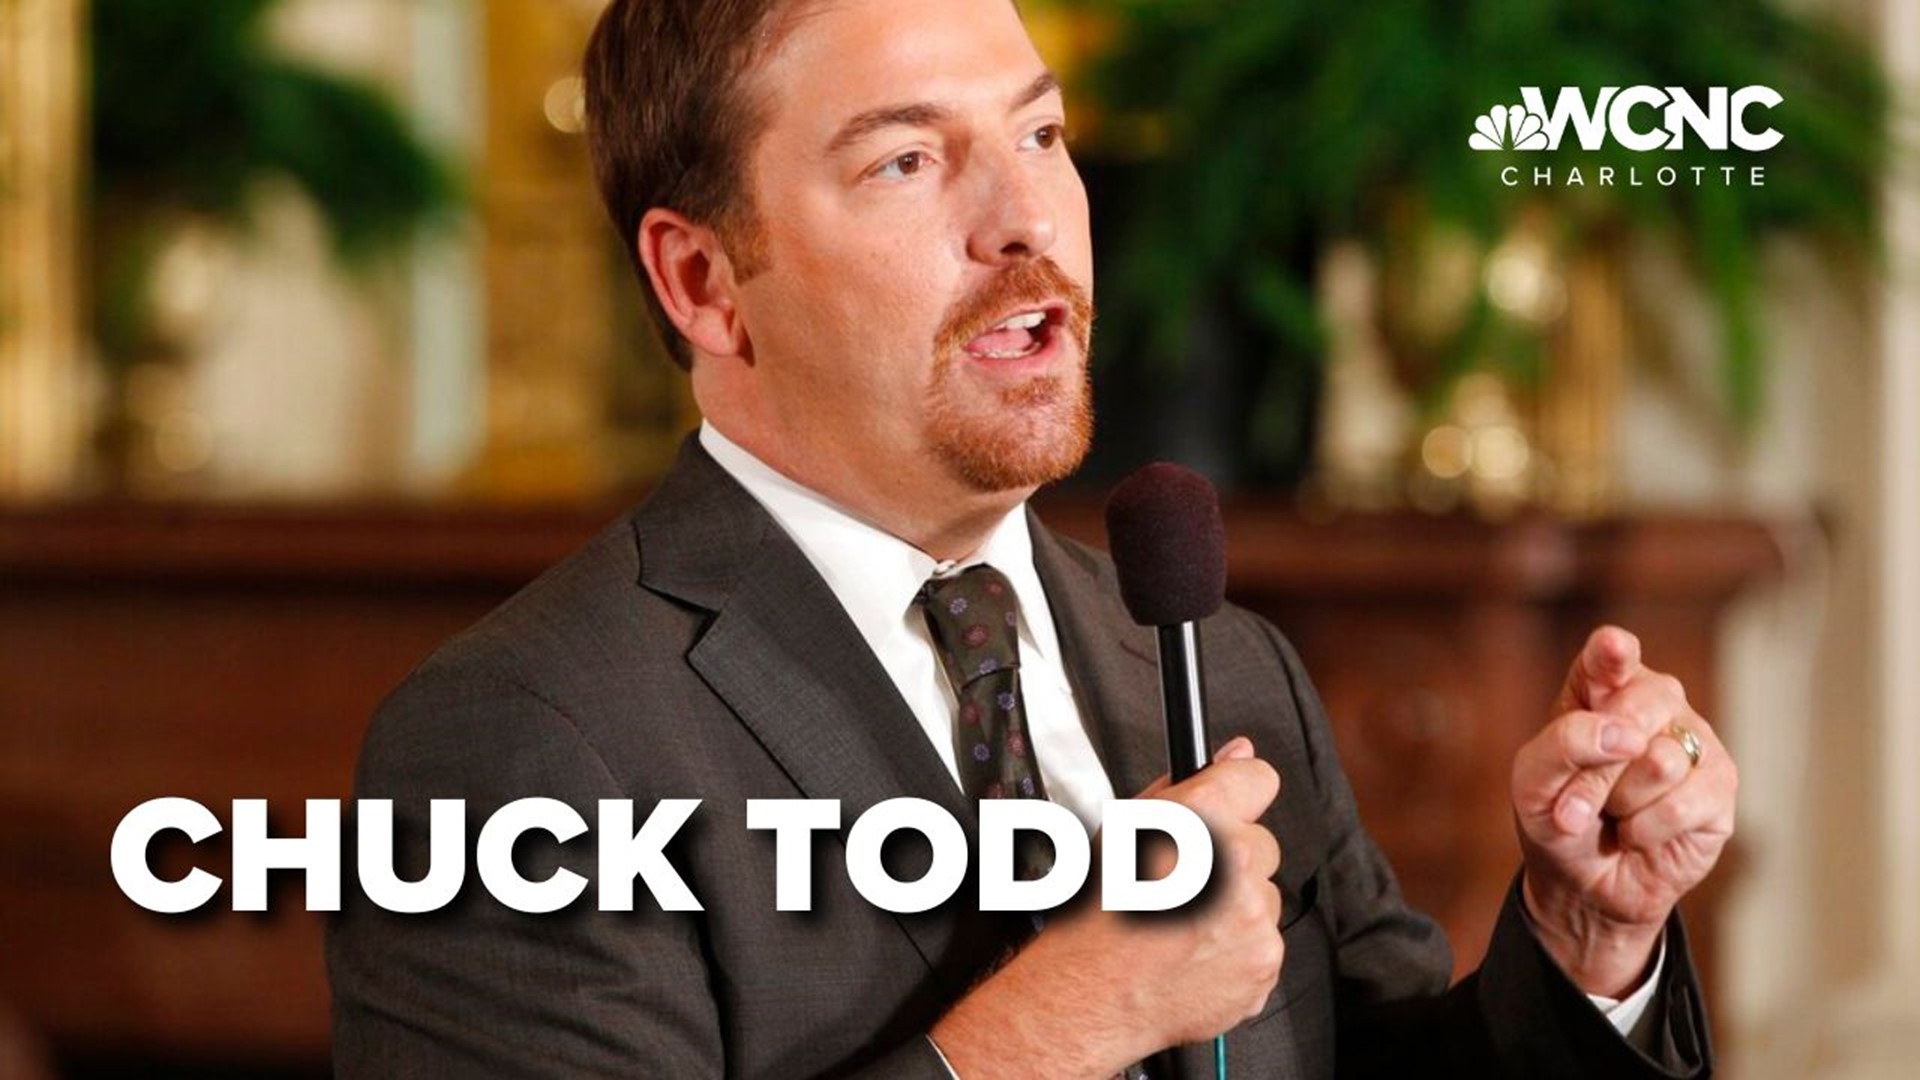 Meet the Press moderator, Chuck Todd, joins WCNC Charlotte to discuss the GOP candidate pool.